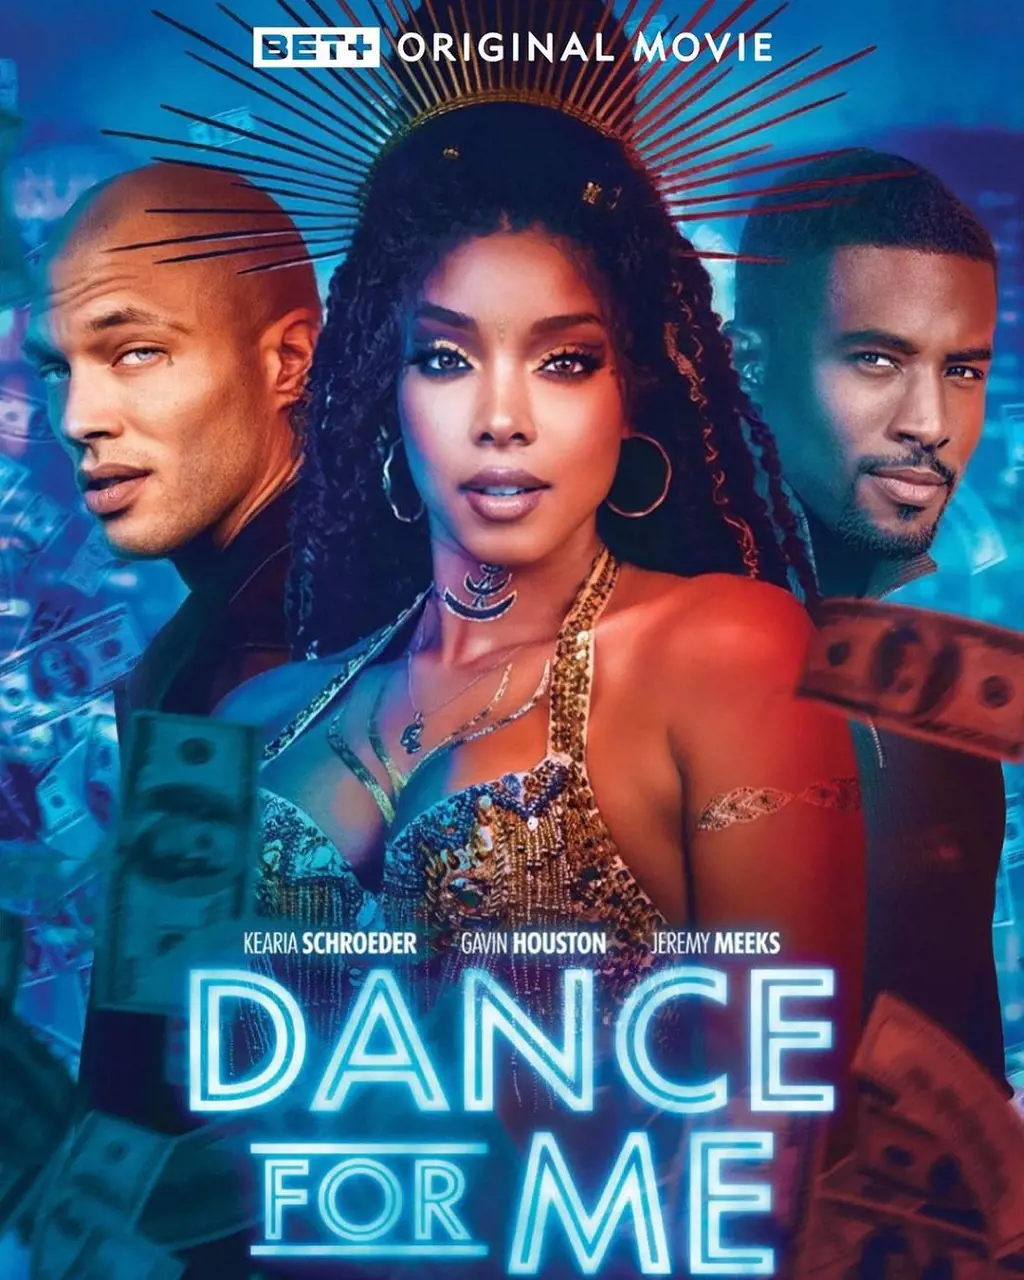 BET Plus new movie Dance For Me is premiering on March 30.